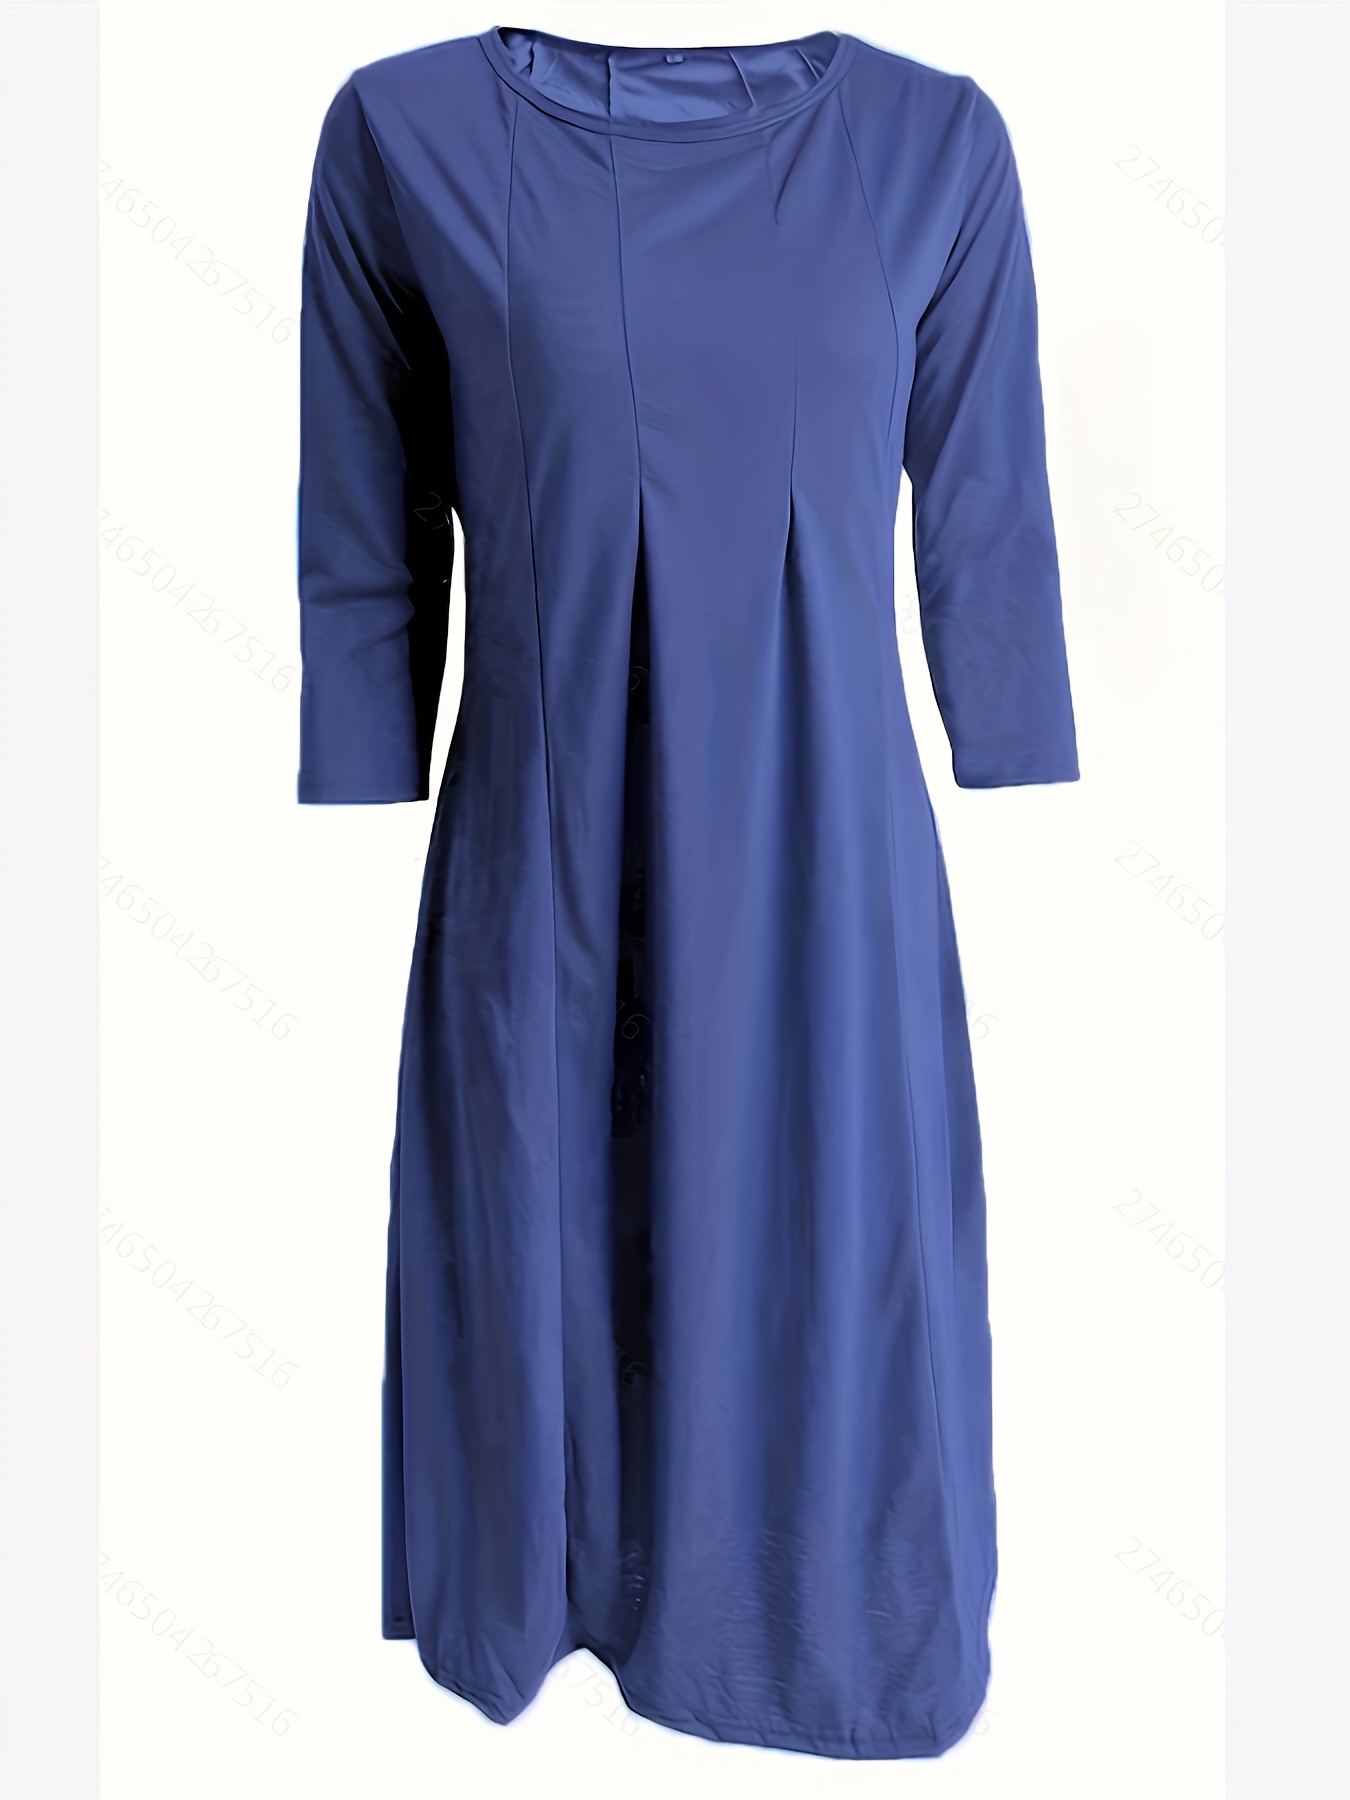 solid crew neck dress elegant 3 4 sleeve a line dress for spring fall womens clothing